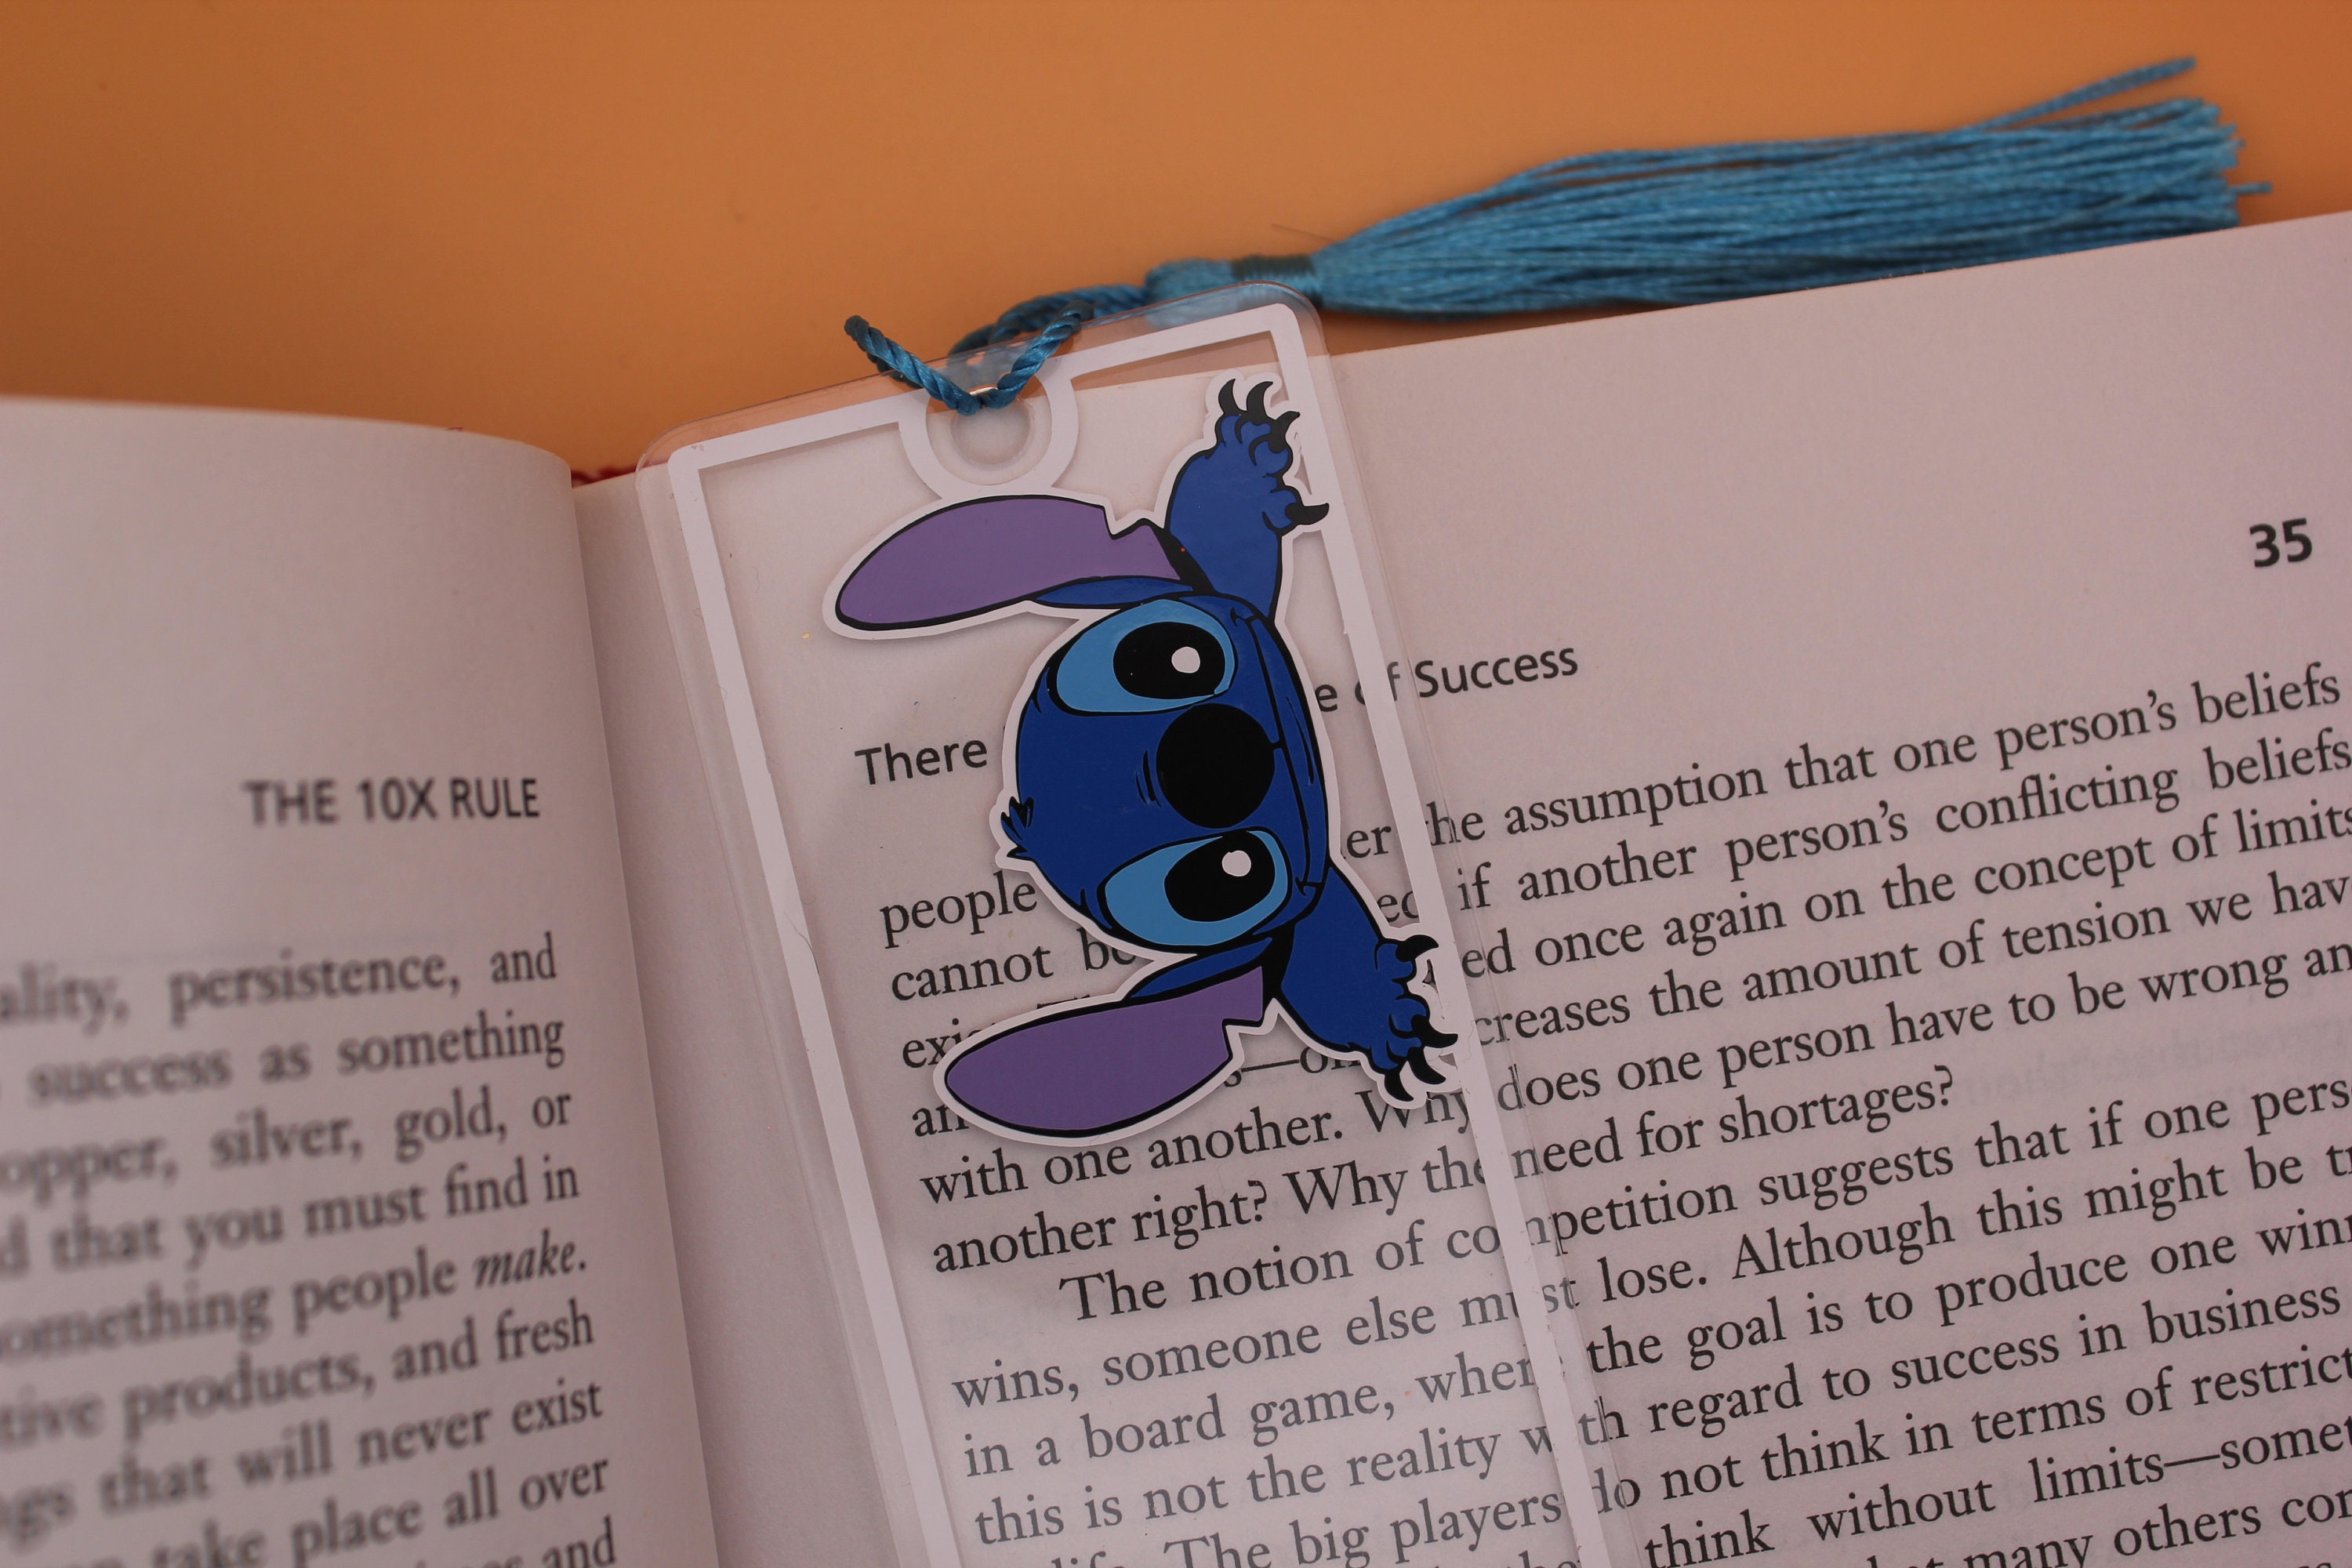 Disney Stitch Bookmarks for Women and Teens Metal Bookmark with Charm - School University Reading Stitch Gifts for Her